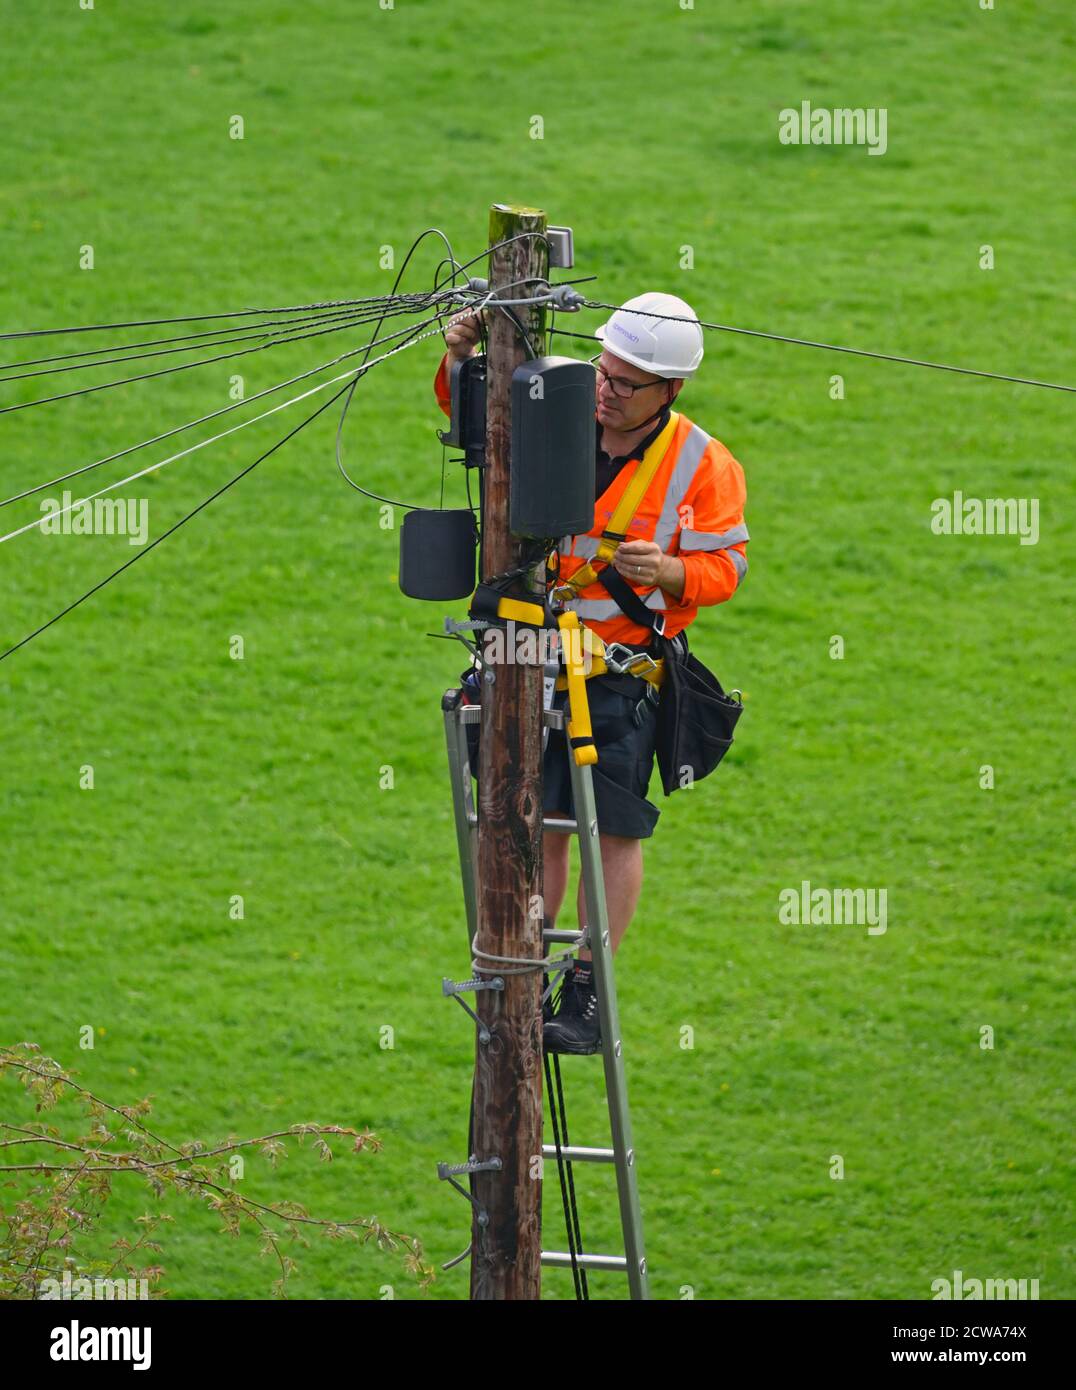 Openreach engineer on ladder at top of wooden pole, working on telecoms equipment. Bowling Fell, Kendal, Cumbria, England, United Kingdom, Europe. Stock Photo